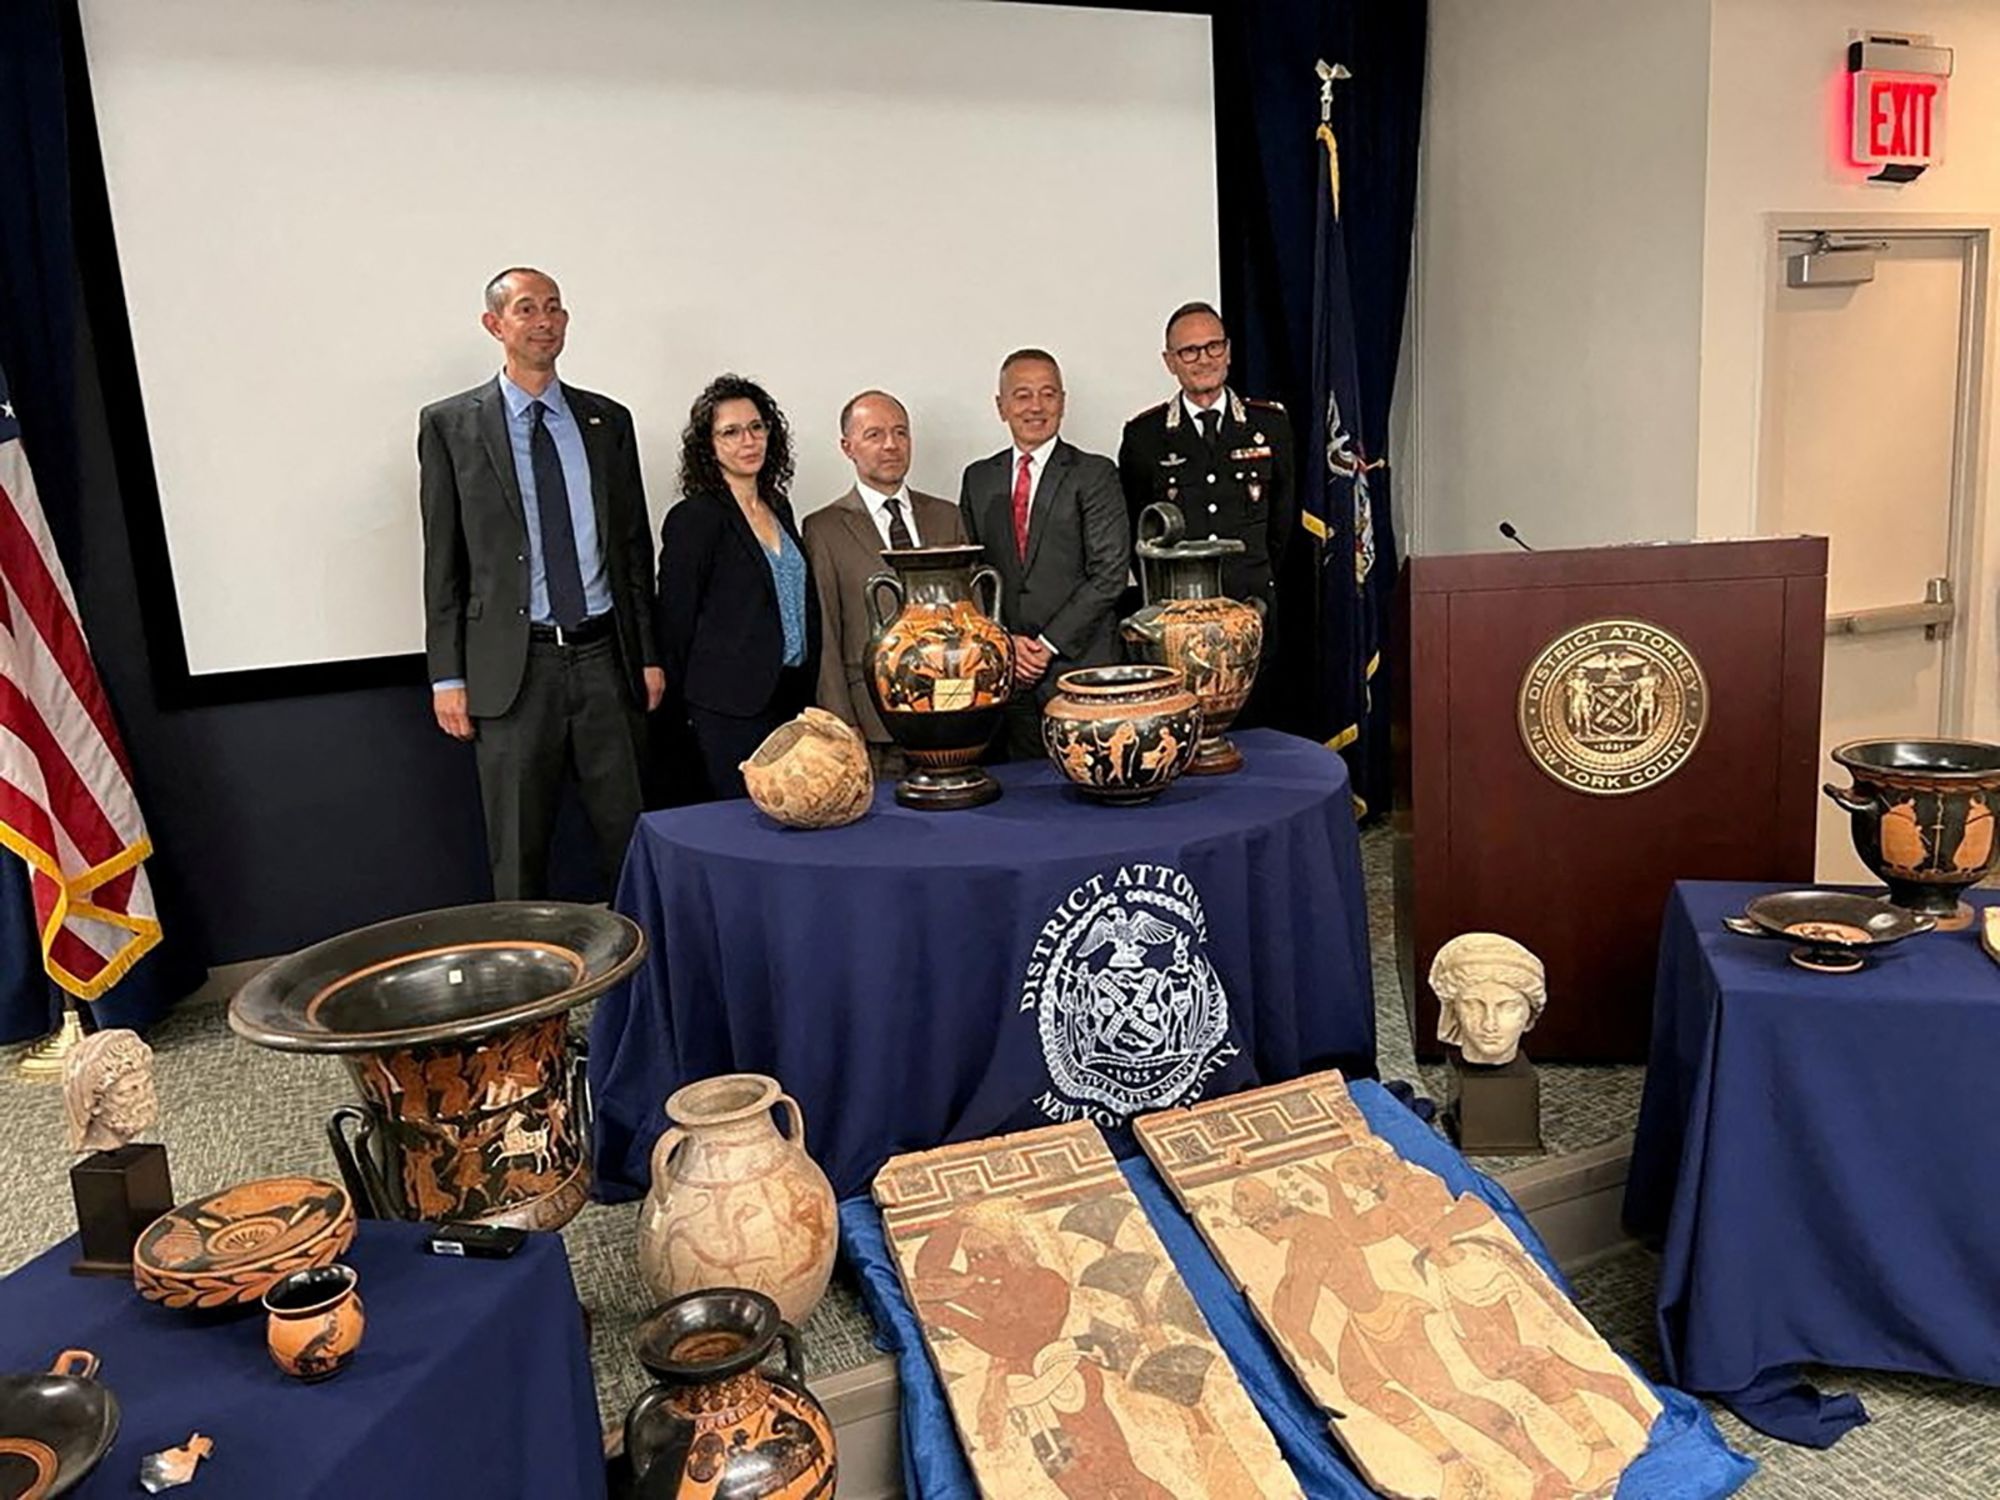 Deputy Special Agent in Charge at Homeland Security Investigation NY, Mike Alfonso, First Legal Secretary of Manhattan District Attorney's Office, Gloria Garcia, Italy's Console, Cesare Bieller, Assistant District Attorney NY, Colonel Matthew Bogdanos, Commander of Carabinieri TPC General Vincenzo Molinese, present some of the antiquities returned to Italy from U.S. during a ceremony in New York, U.S., August 8, 2023.